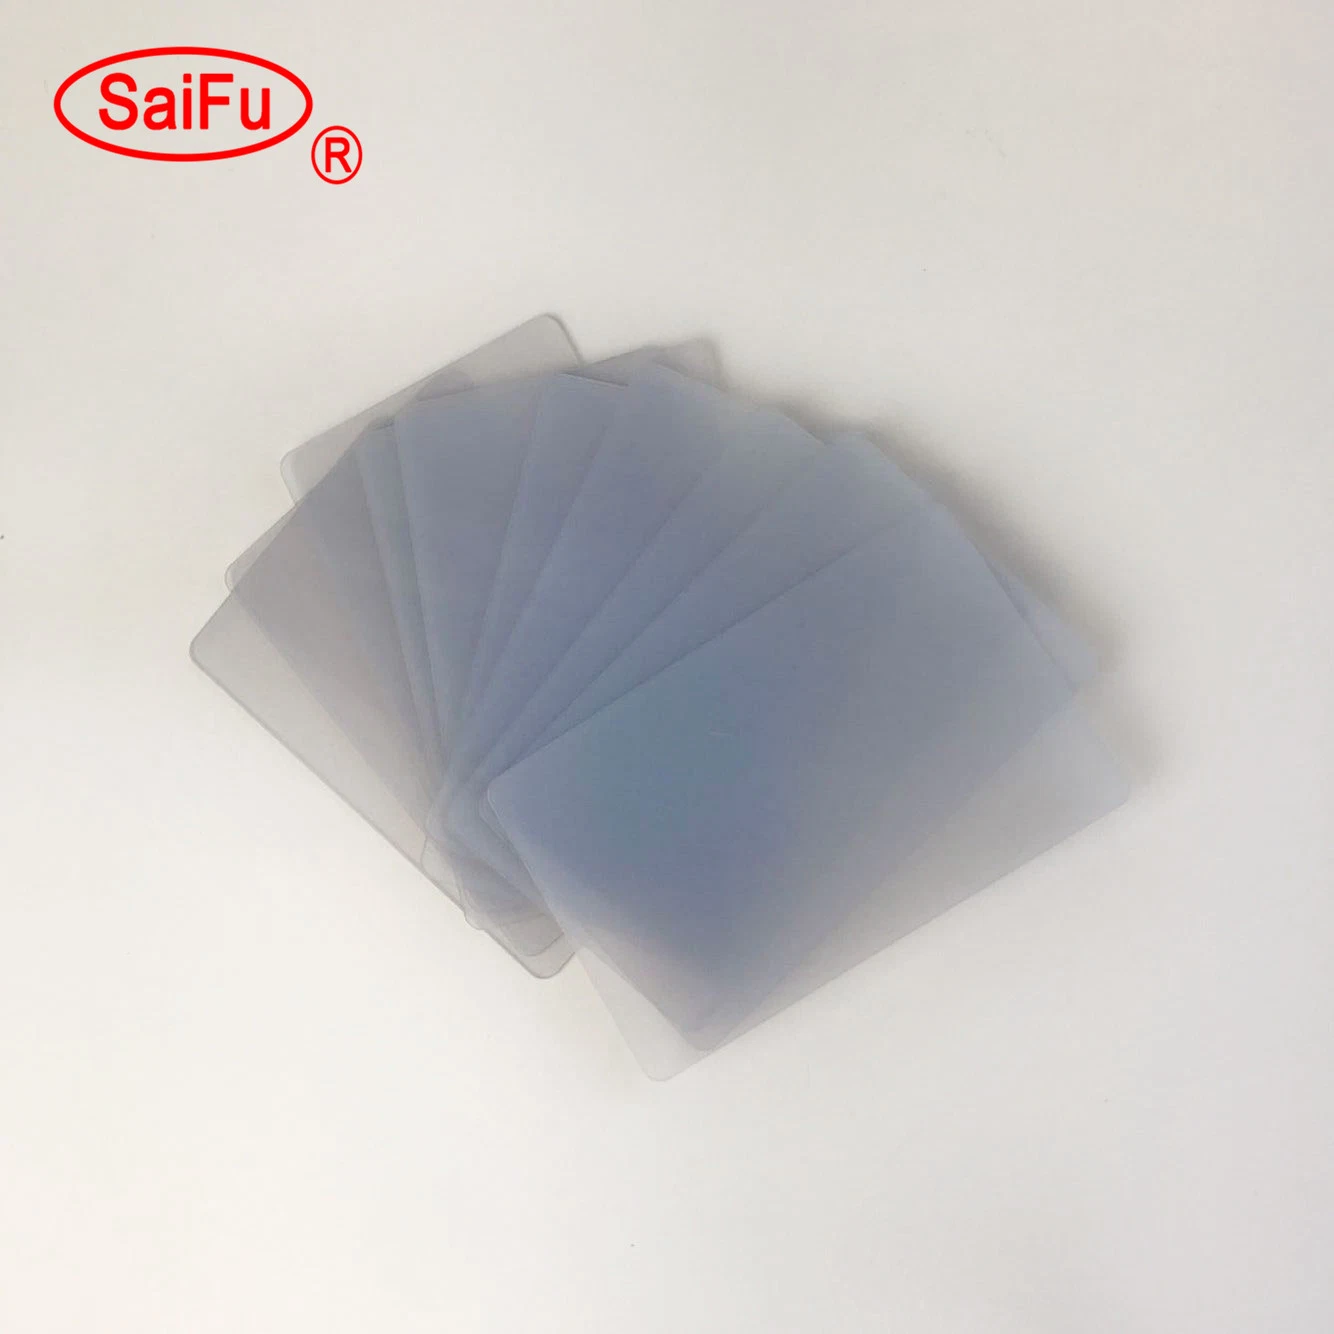 Credit Card Size Transparent PVC Card for Business Card